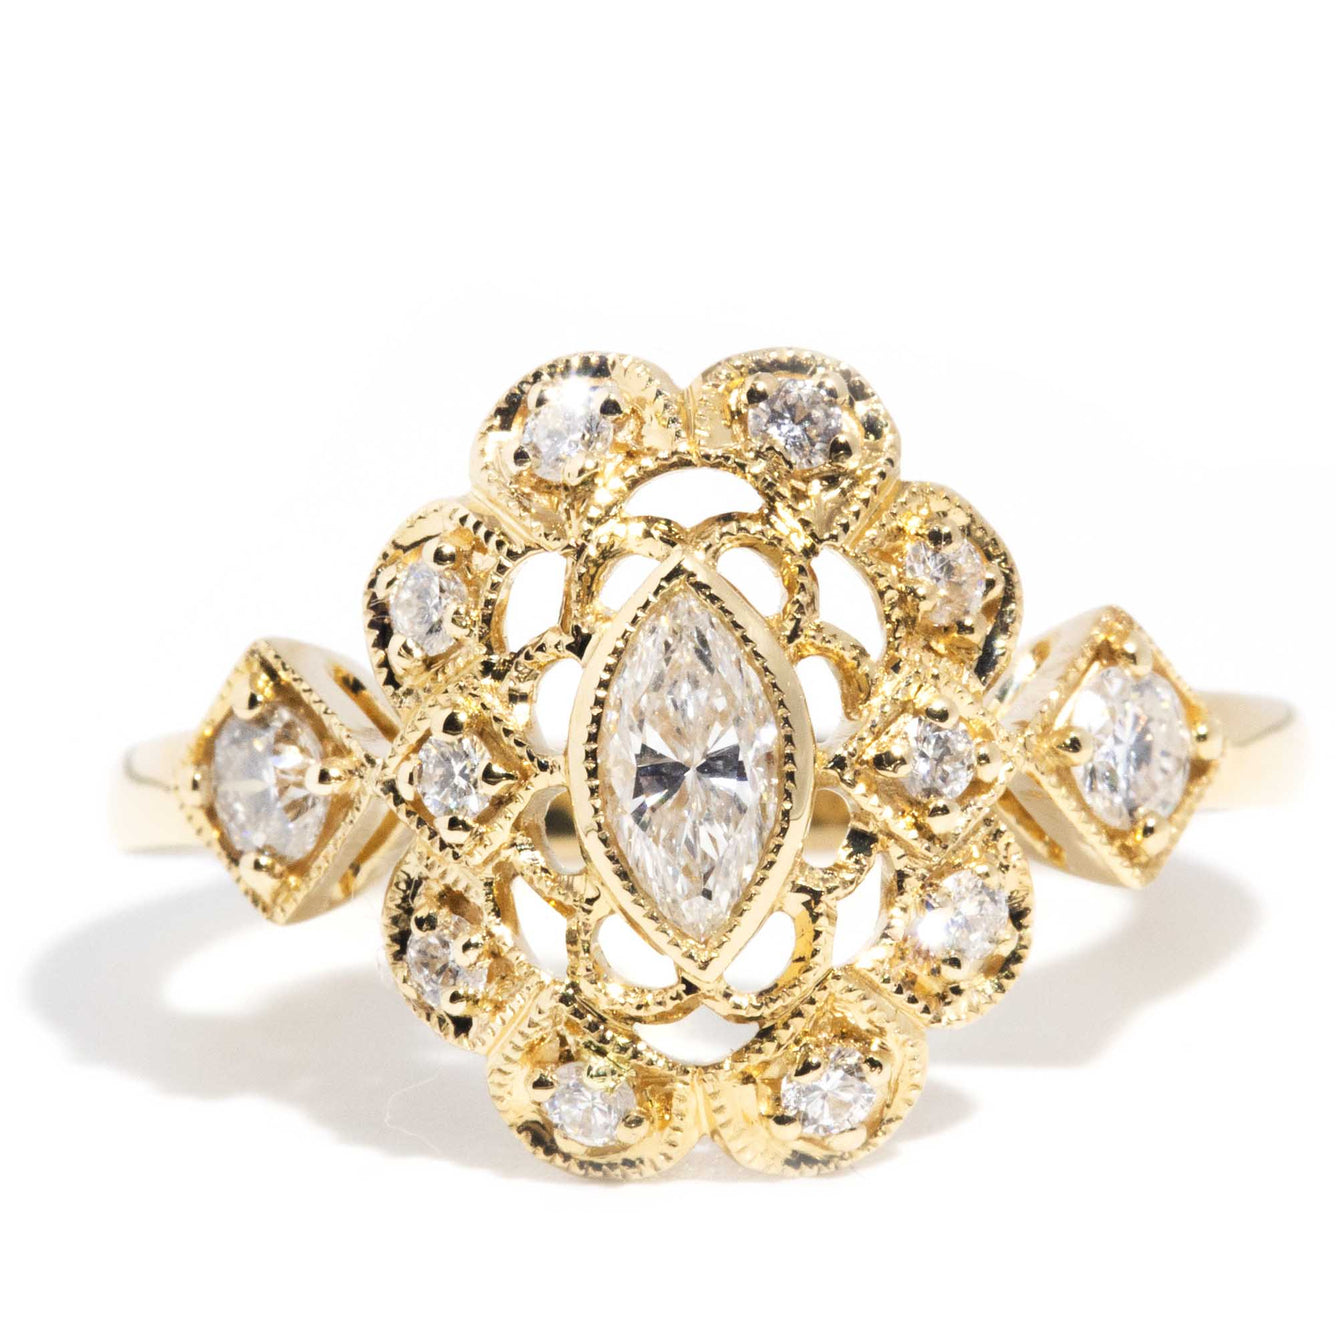 Hillary ADGL Certified 0.57 Carat Diamond 18ct Gold Cluster Ring* OB Rings Imperial Jewellery Imperial Jewellery - Hamilton 